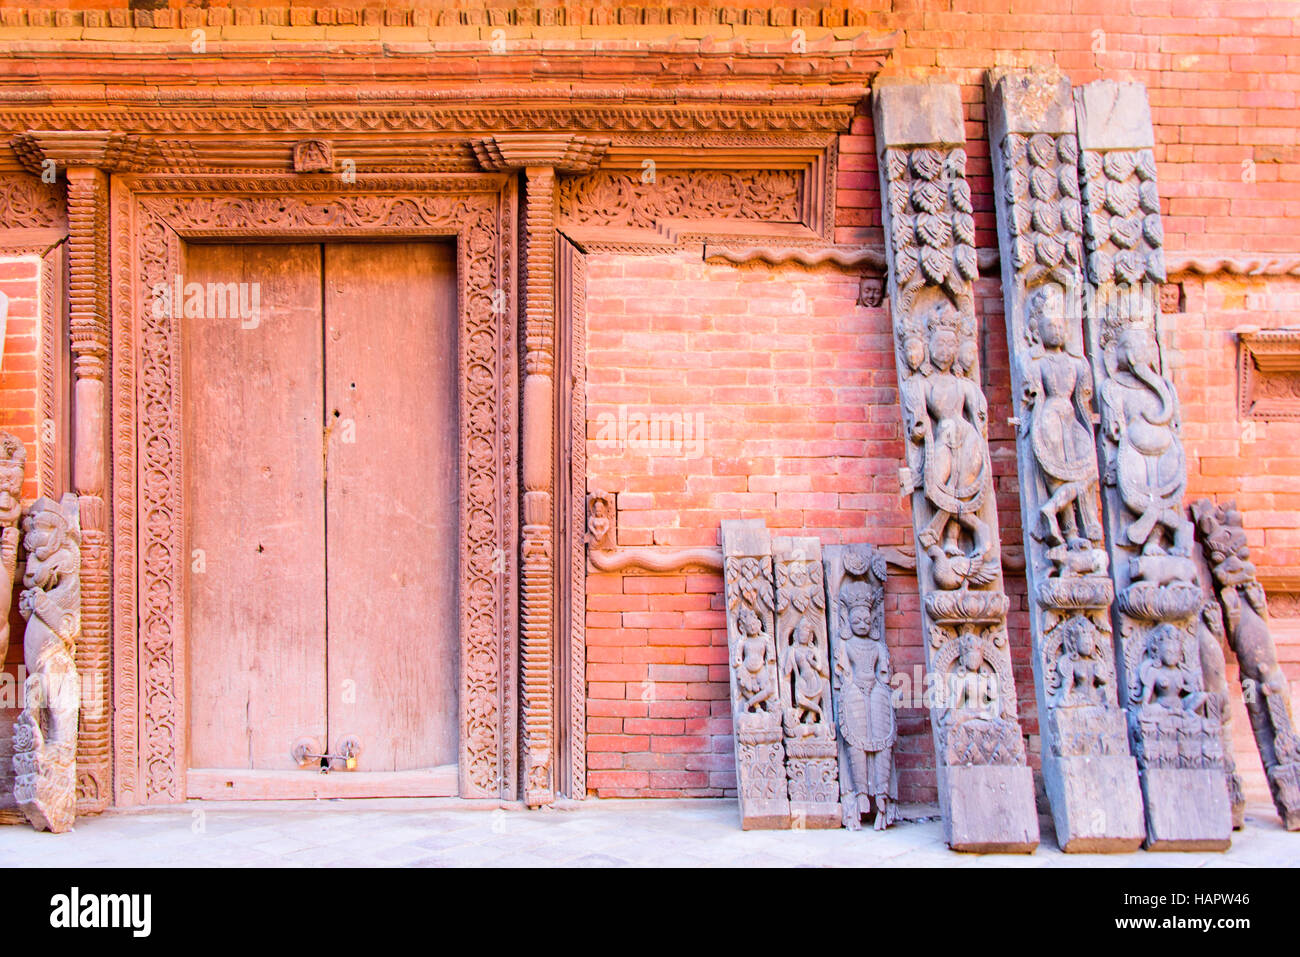 Wooden carvings removed from Palace in Kathmandu Durbar square Stock Photo